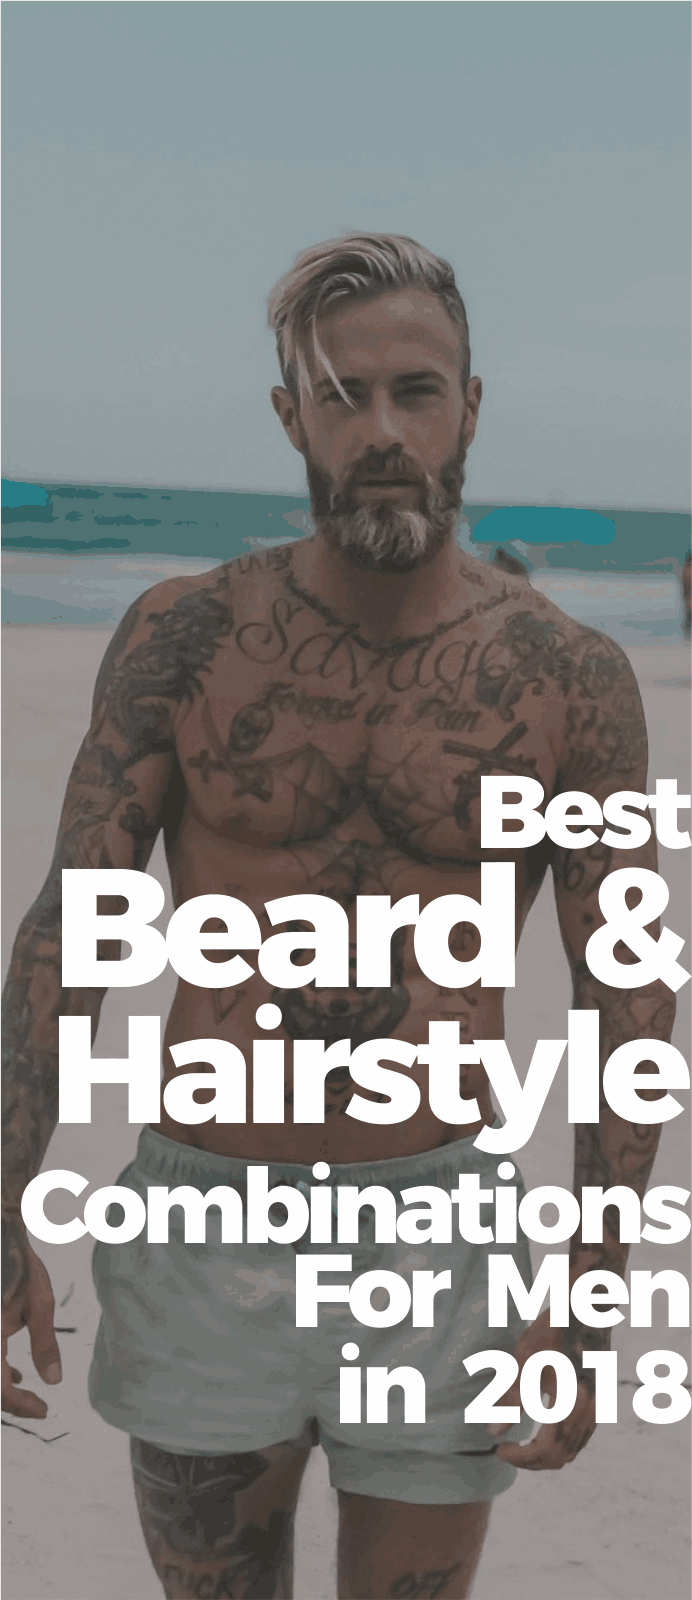 Best Beard & Hairstyle Combinations